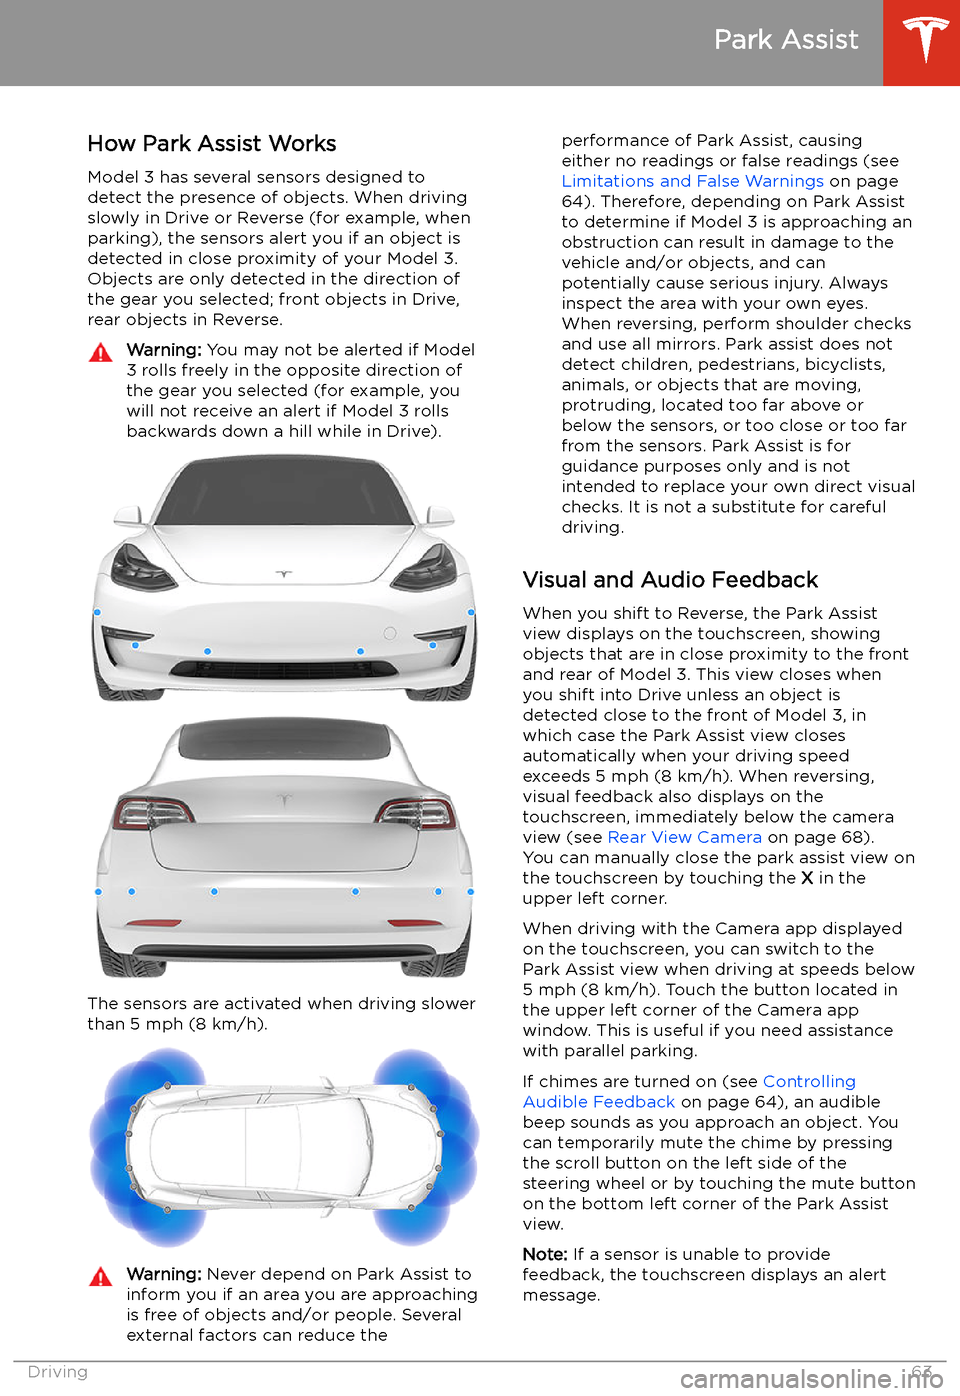 TESLA MODEL 3 2019   (Europe) Repair Manual Park Assist
How Park Assist Works
Model 3 has several sensors designed to
detect the presence of objects. When driving
slowly in Drive or Reverse (for example, when
parking), the sensors alert you if 